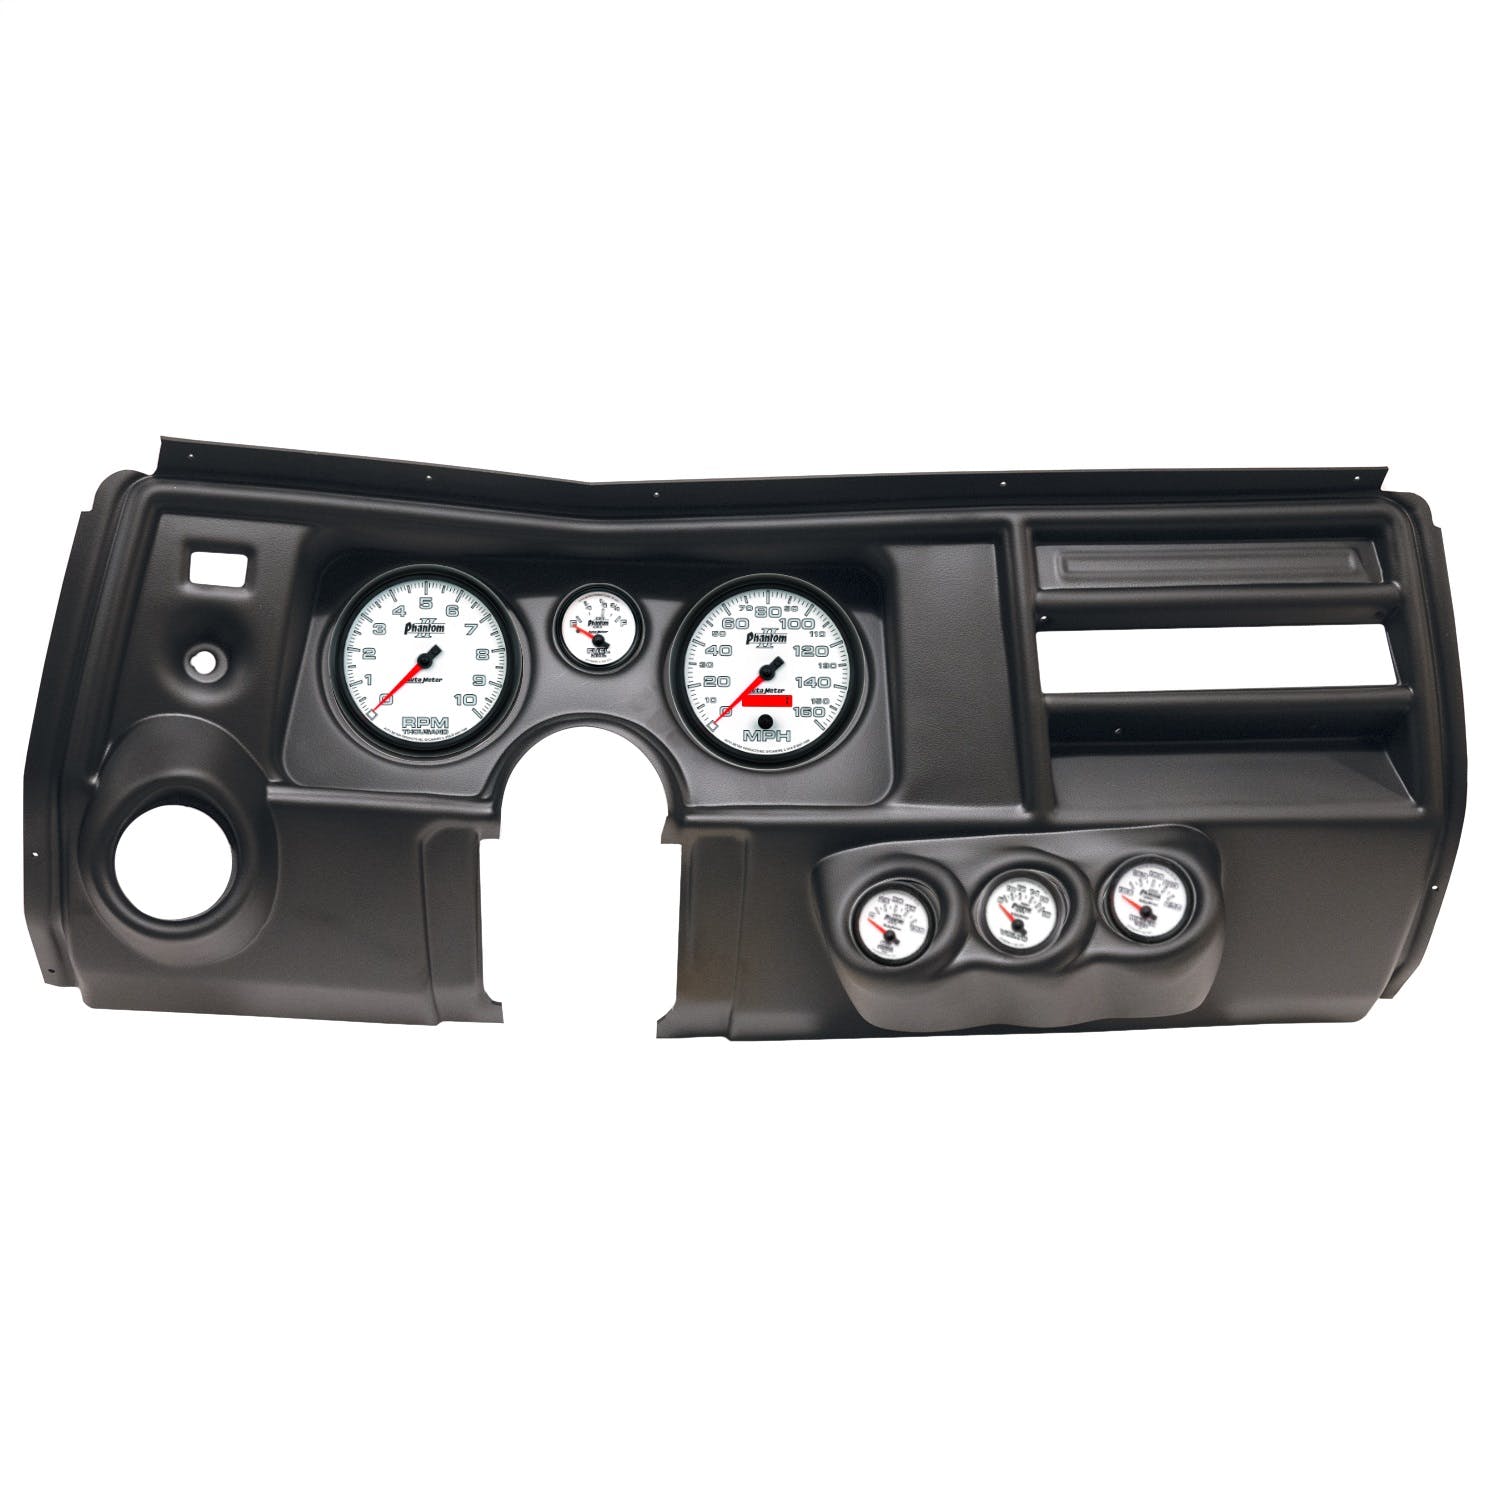 AutoMeter Products 2911-10 6 Gauge Direct-Fit Dash Kit, Chevy Chevelle Vent 69, Phantom II